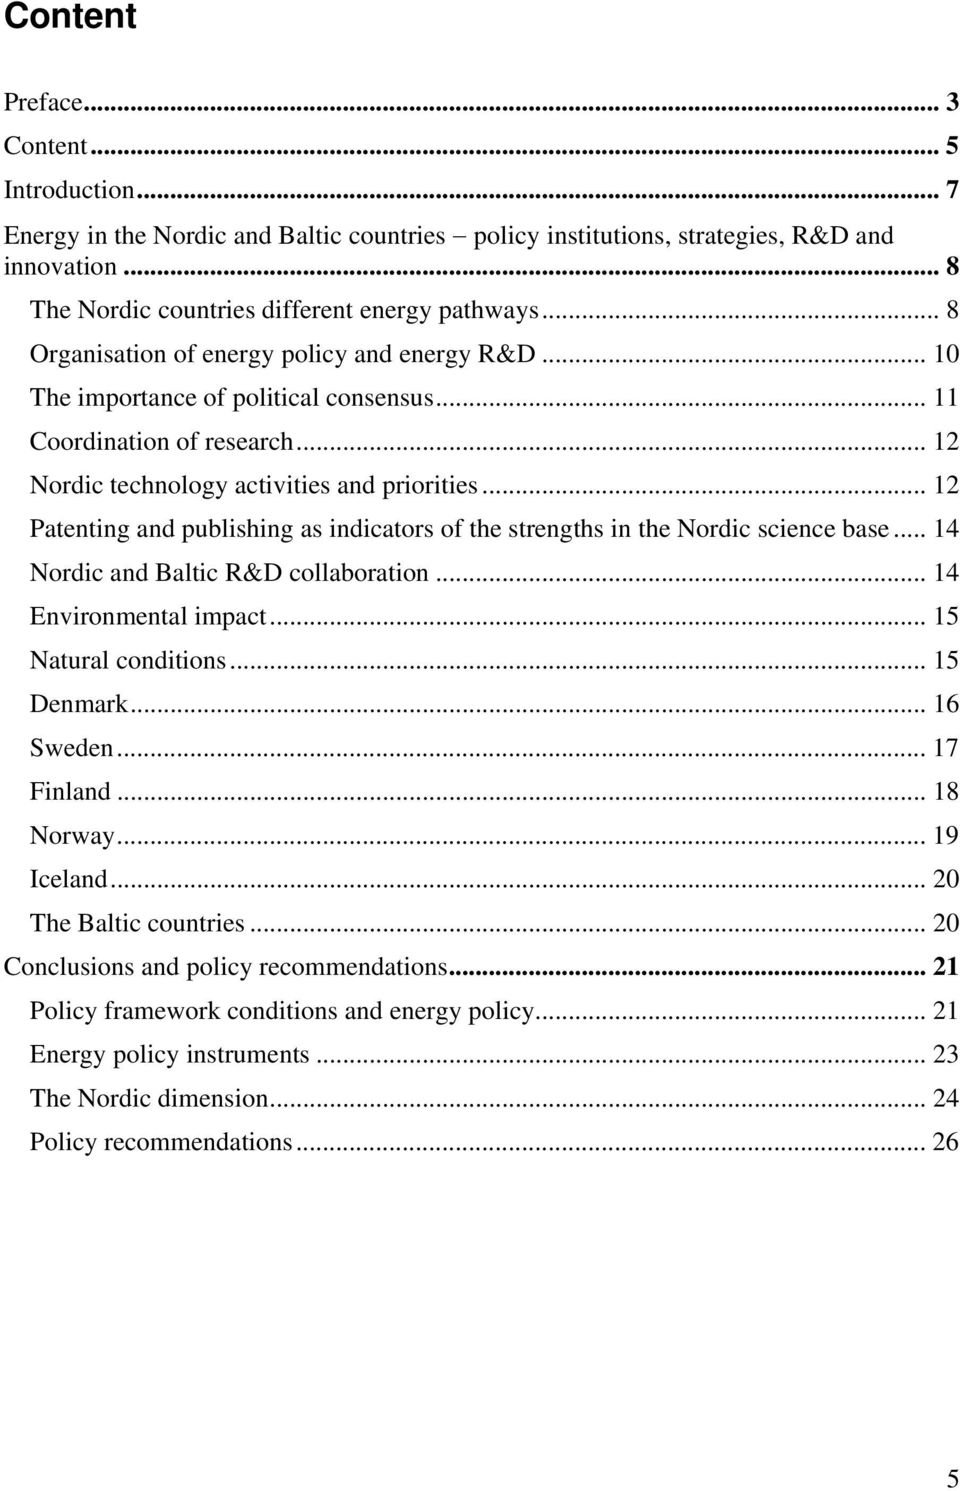 .. 12 Patenting and publishing as indicators of the strengths in the Nordic science base... 14 Nordic and Baltic R&D collaboration... 14 Environmental impact... 15 Natural conditions... 15 Denmark.